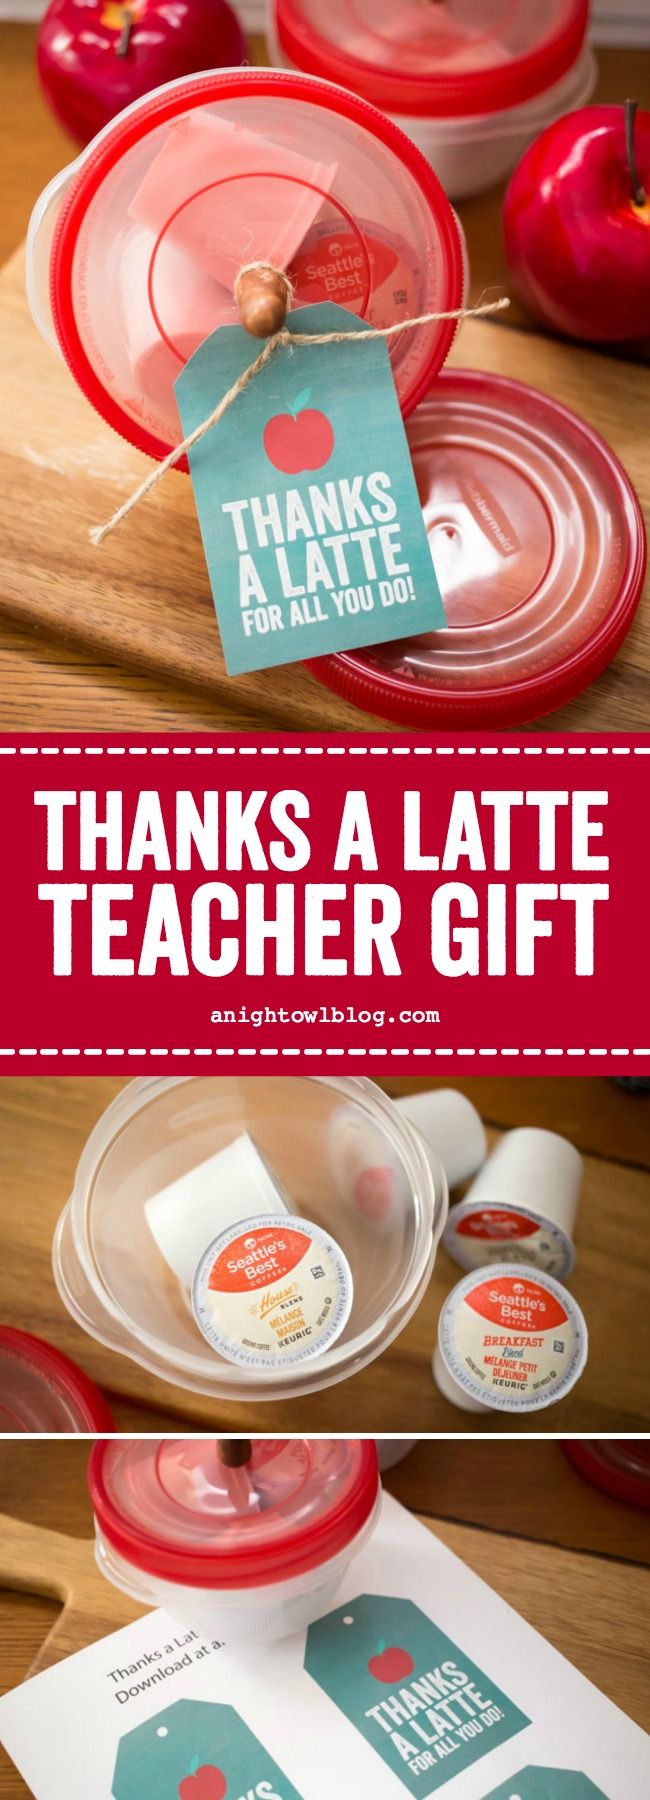 Thank a teacher making a difference in your child’s life with a Thanks a Latte...